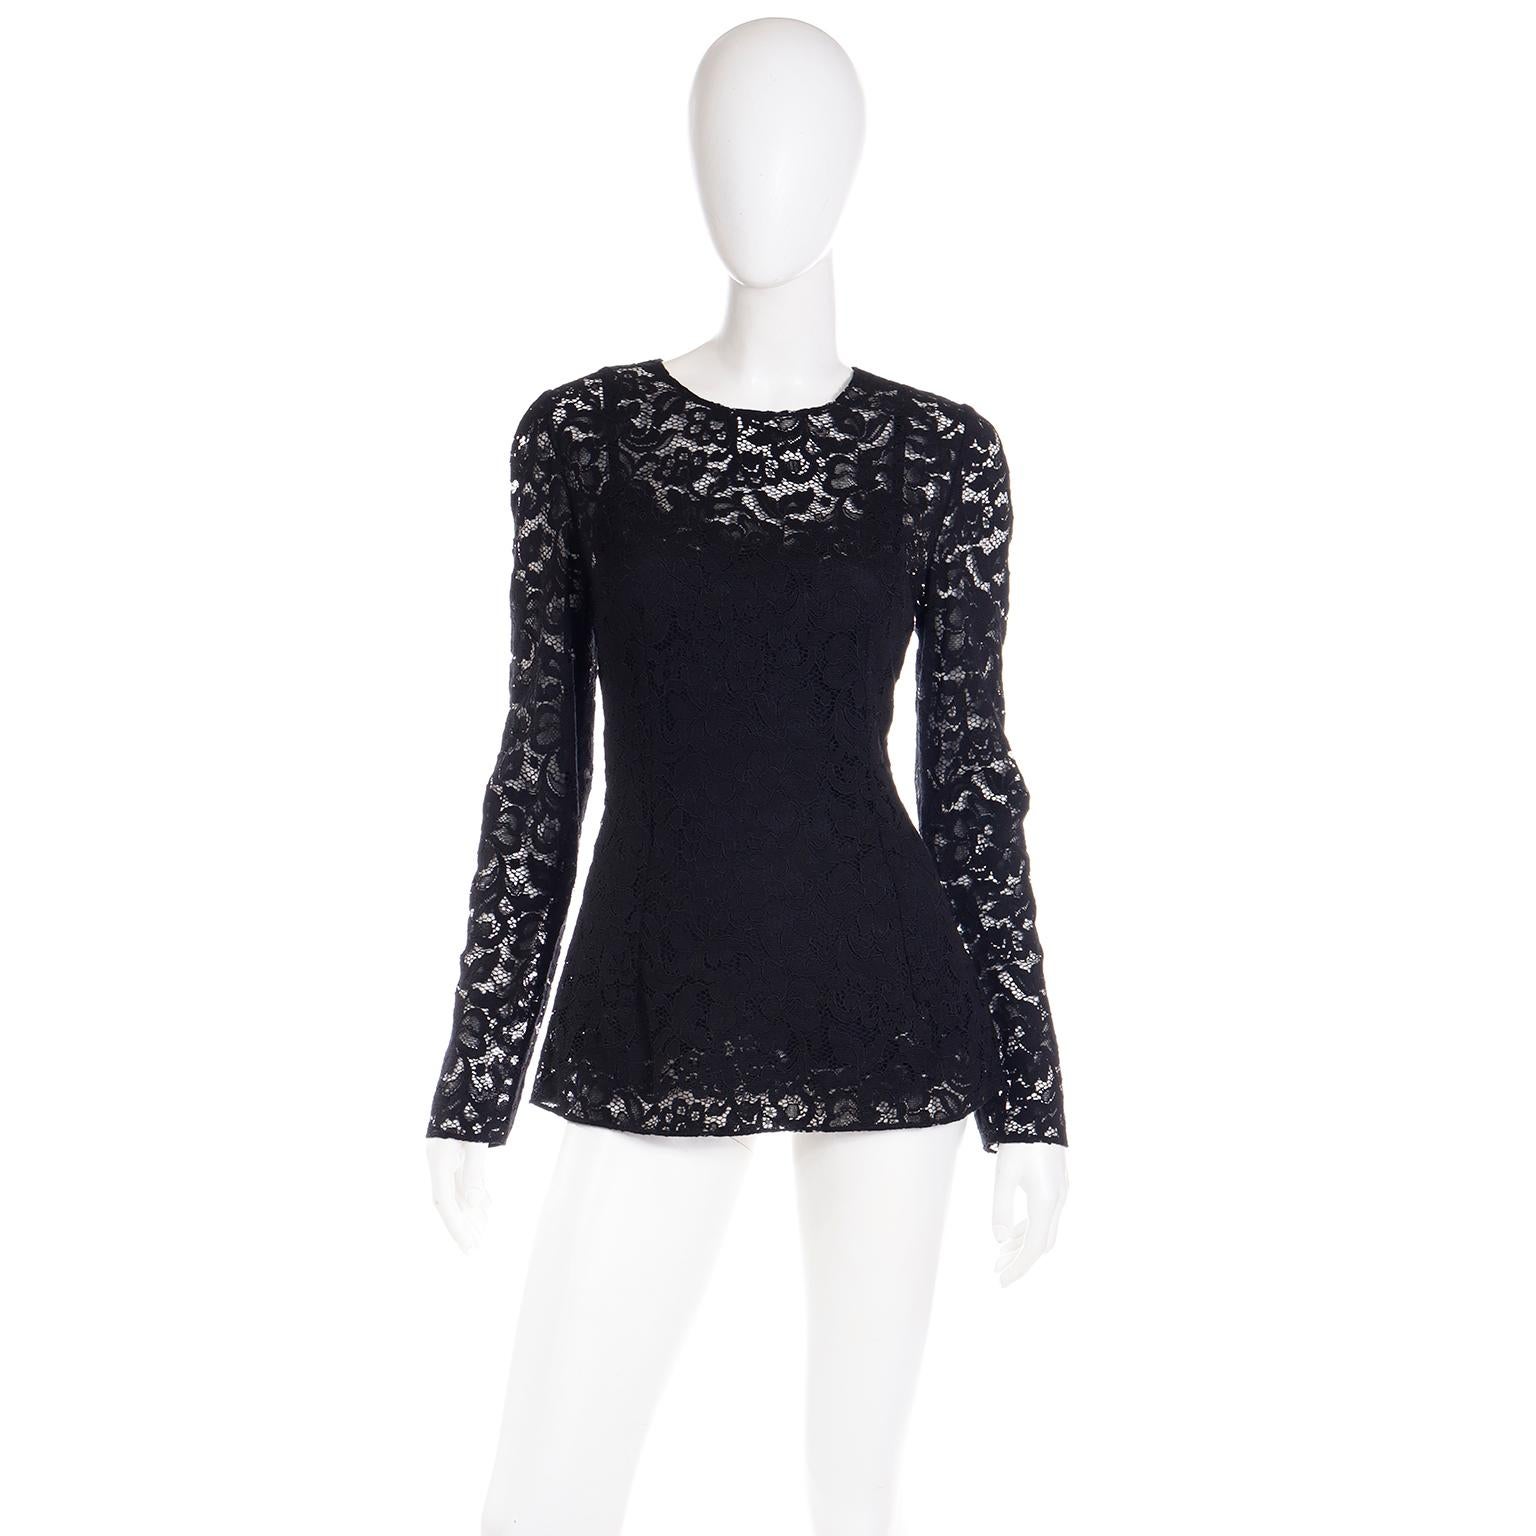 This stunning Dolce & Gabbana sheer black lace long sleeve top has an attached black camisole underneath. The camisole and outer lace portion both have a back center zipper closure. There are princess seams in both the front and back and the top has